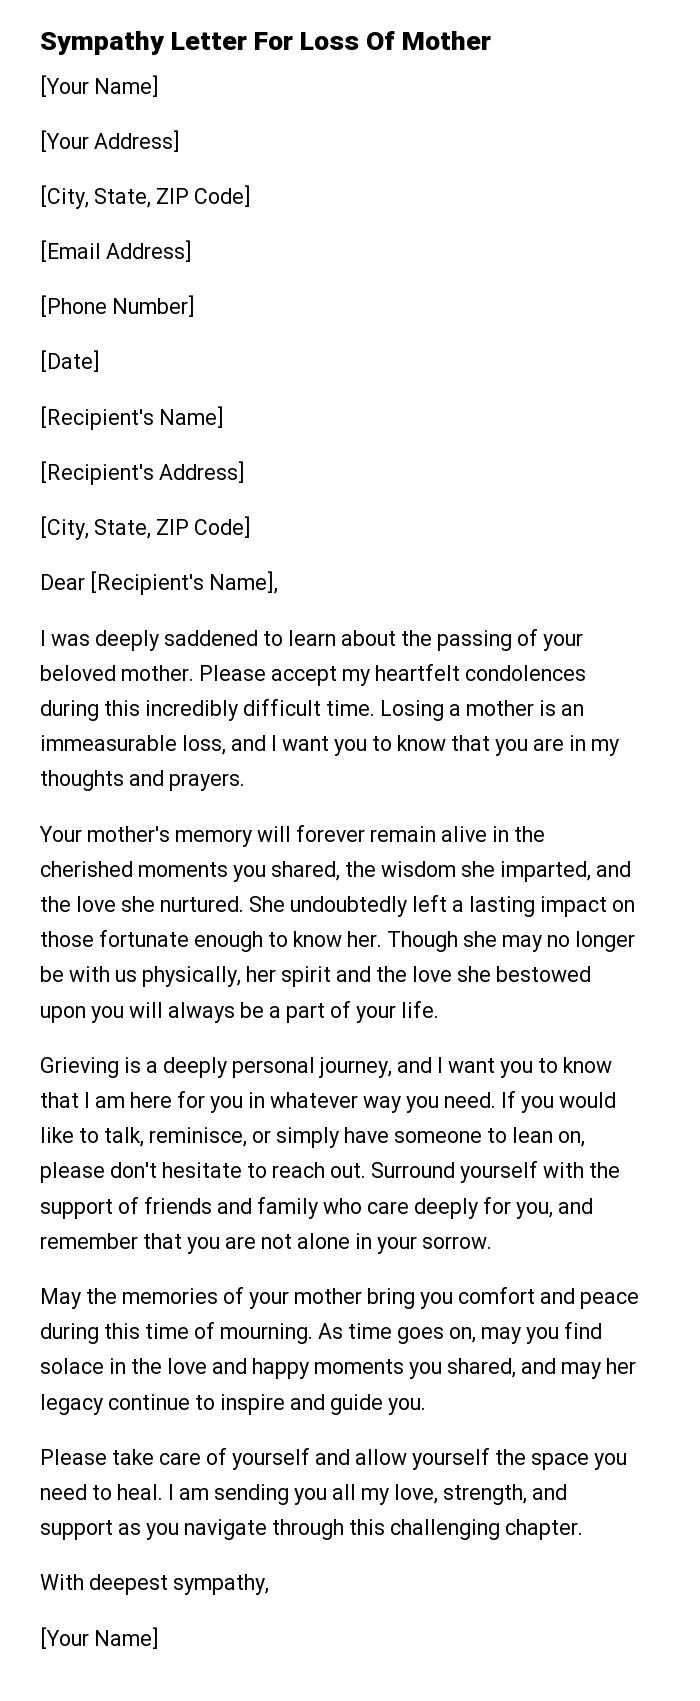 Sympathy Letter For Loss Of Mother